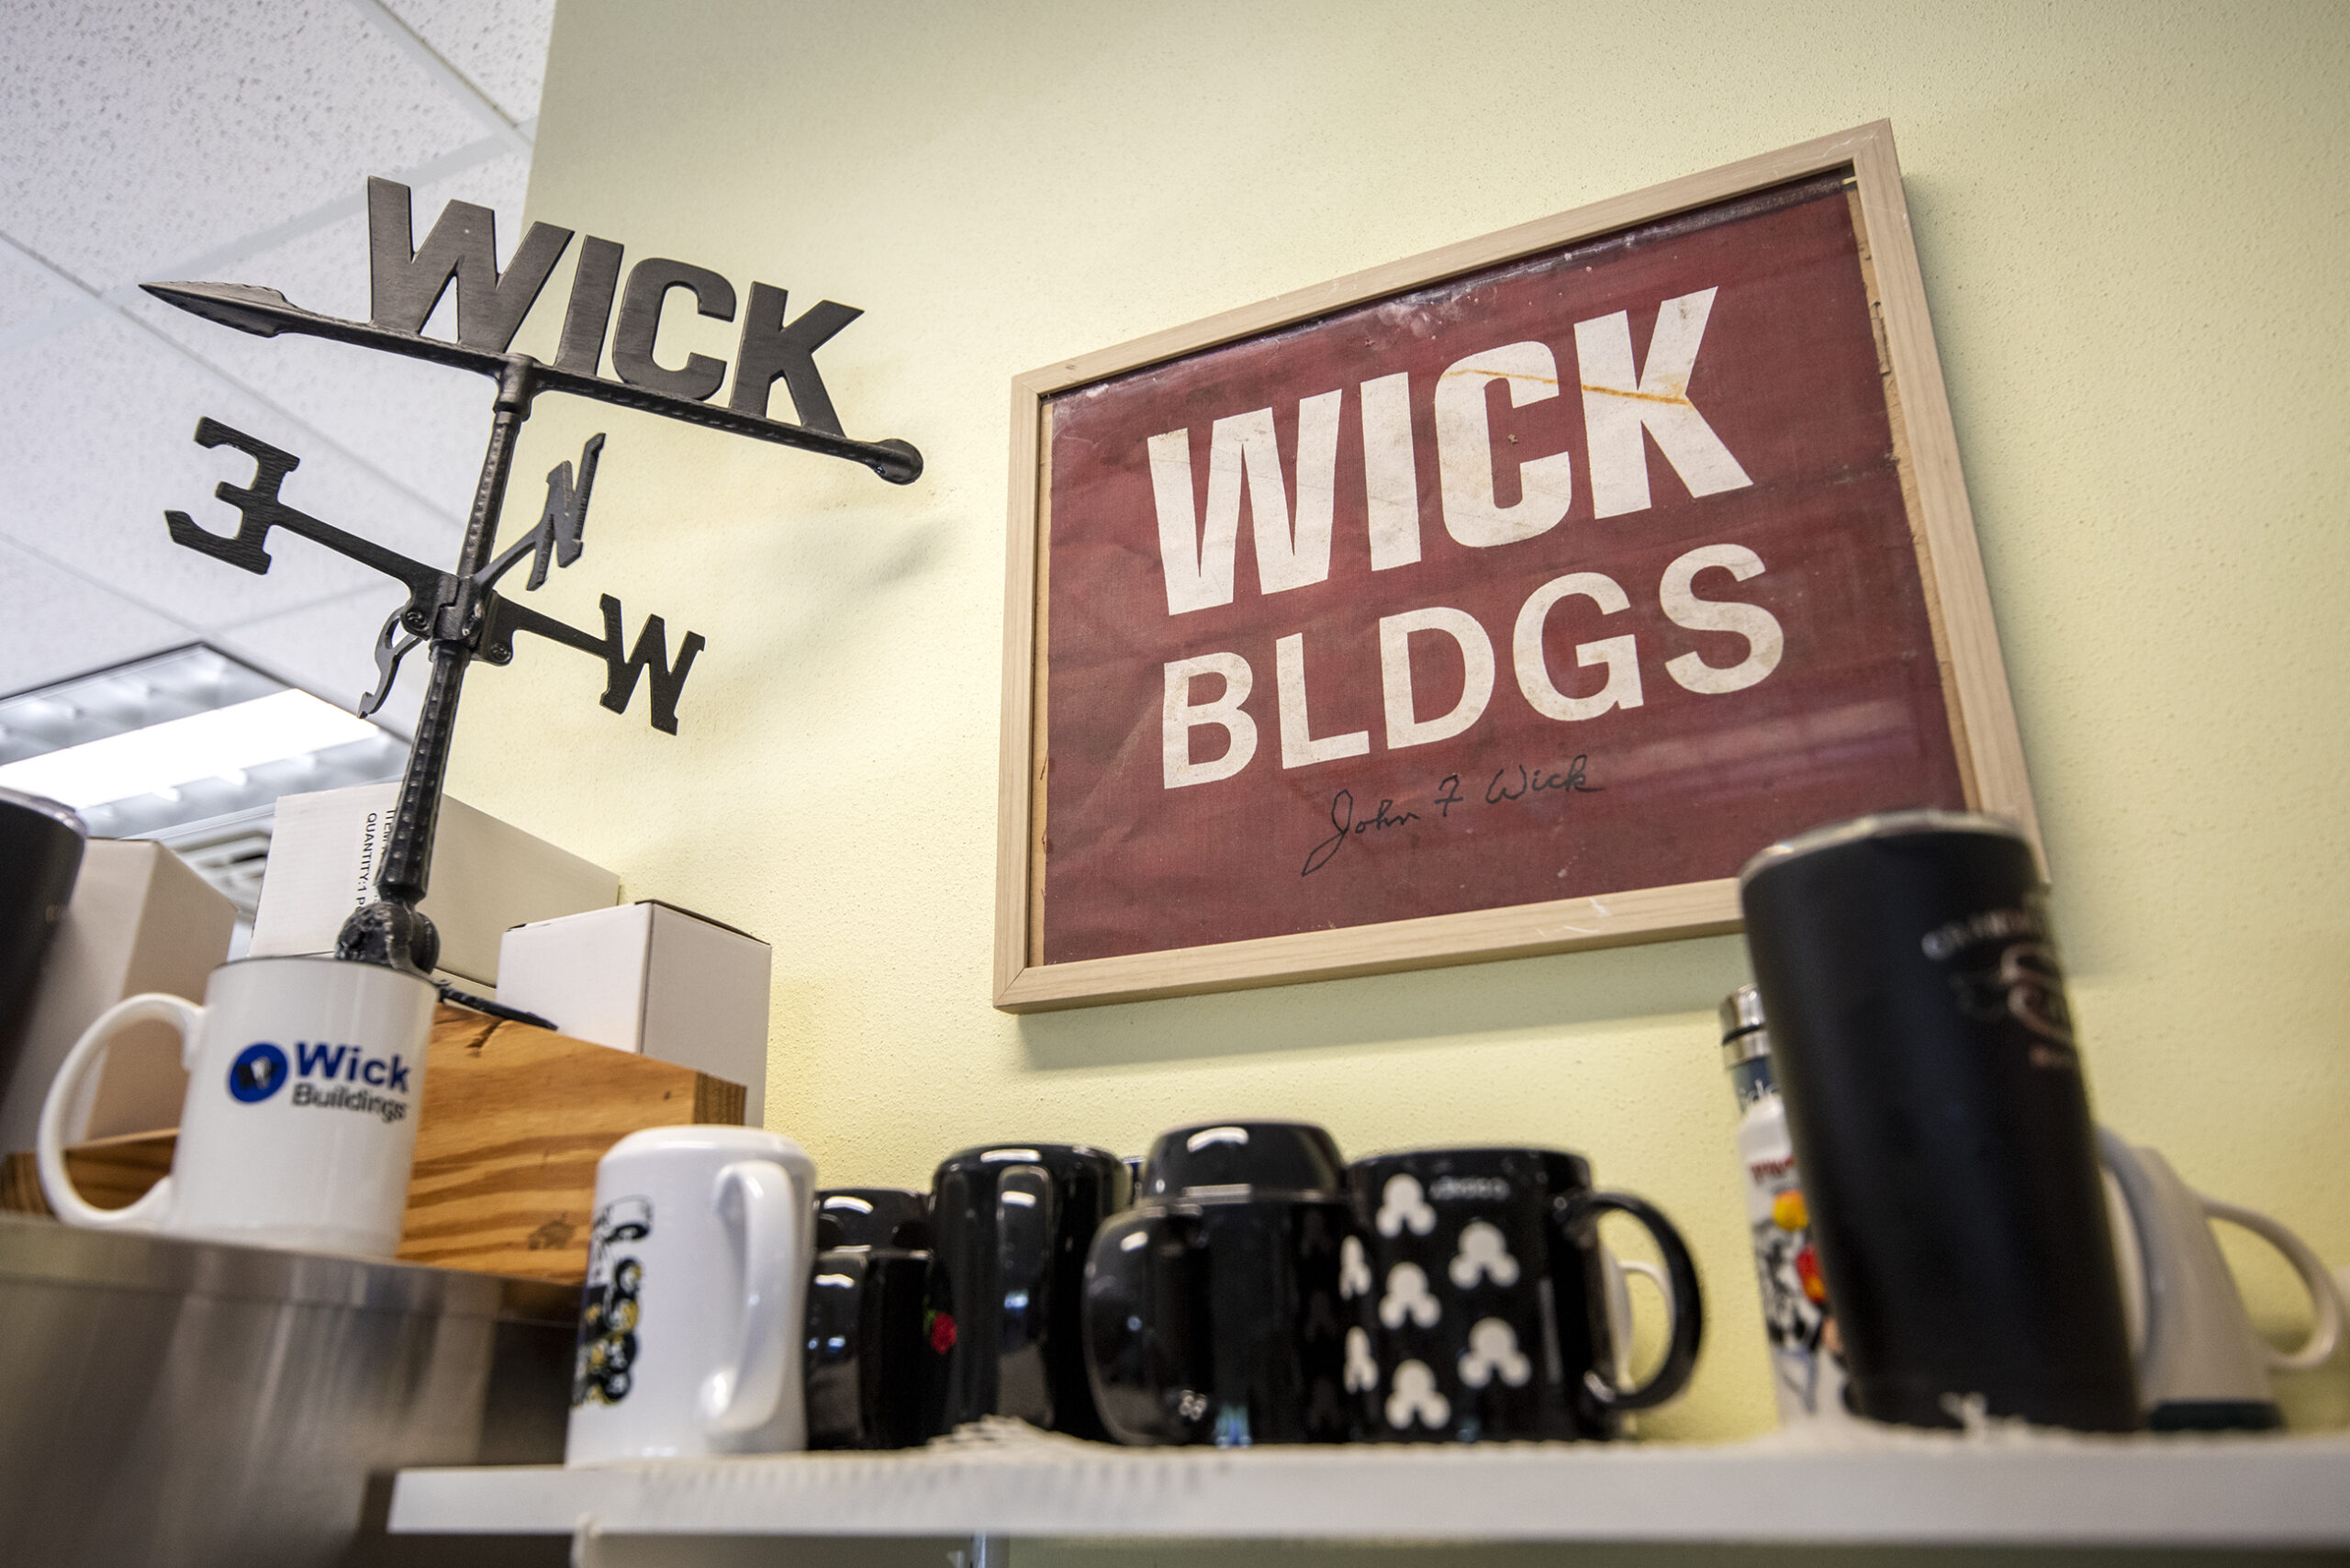 Decorations hang on the walls at Grandma Mary's Café showing Wick memorabilia Wednesday, June 22, 2022, in Mazomanie, Wis. Angela Major/WPR